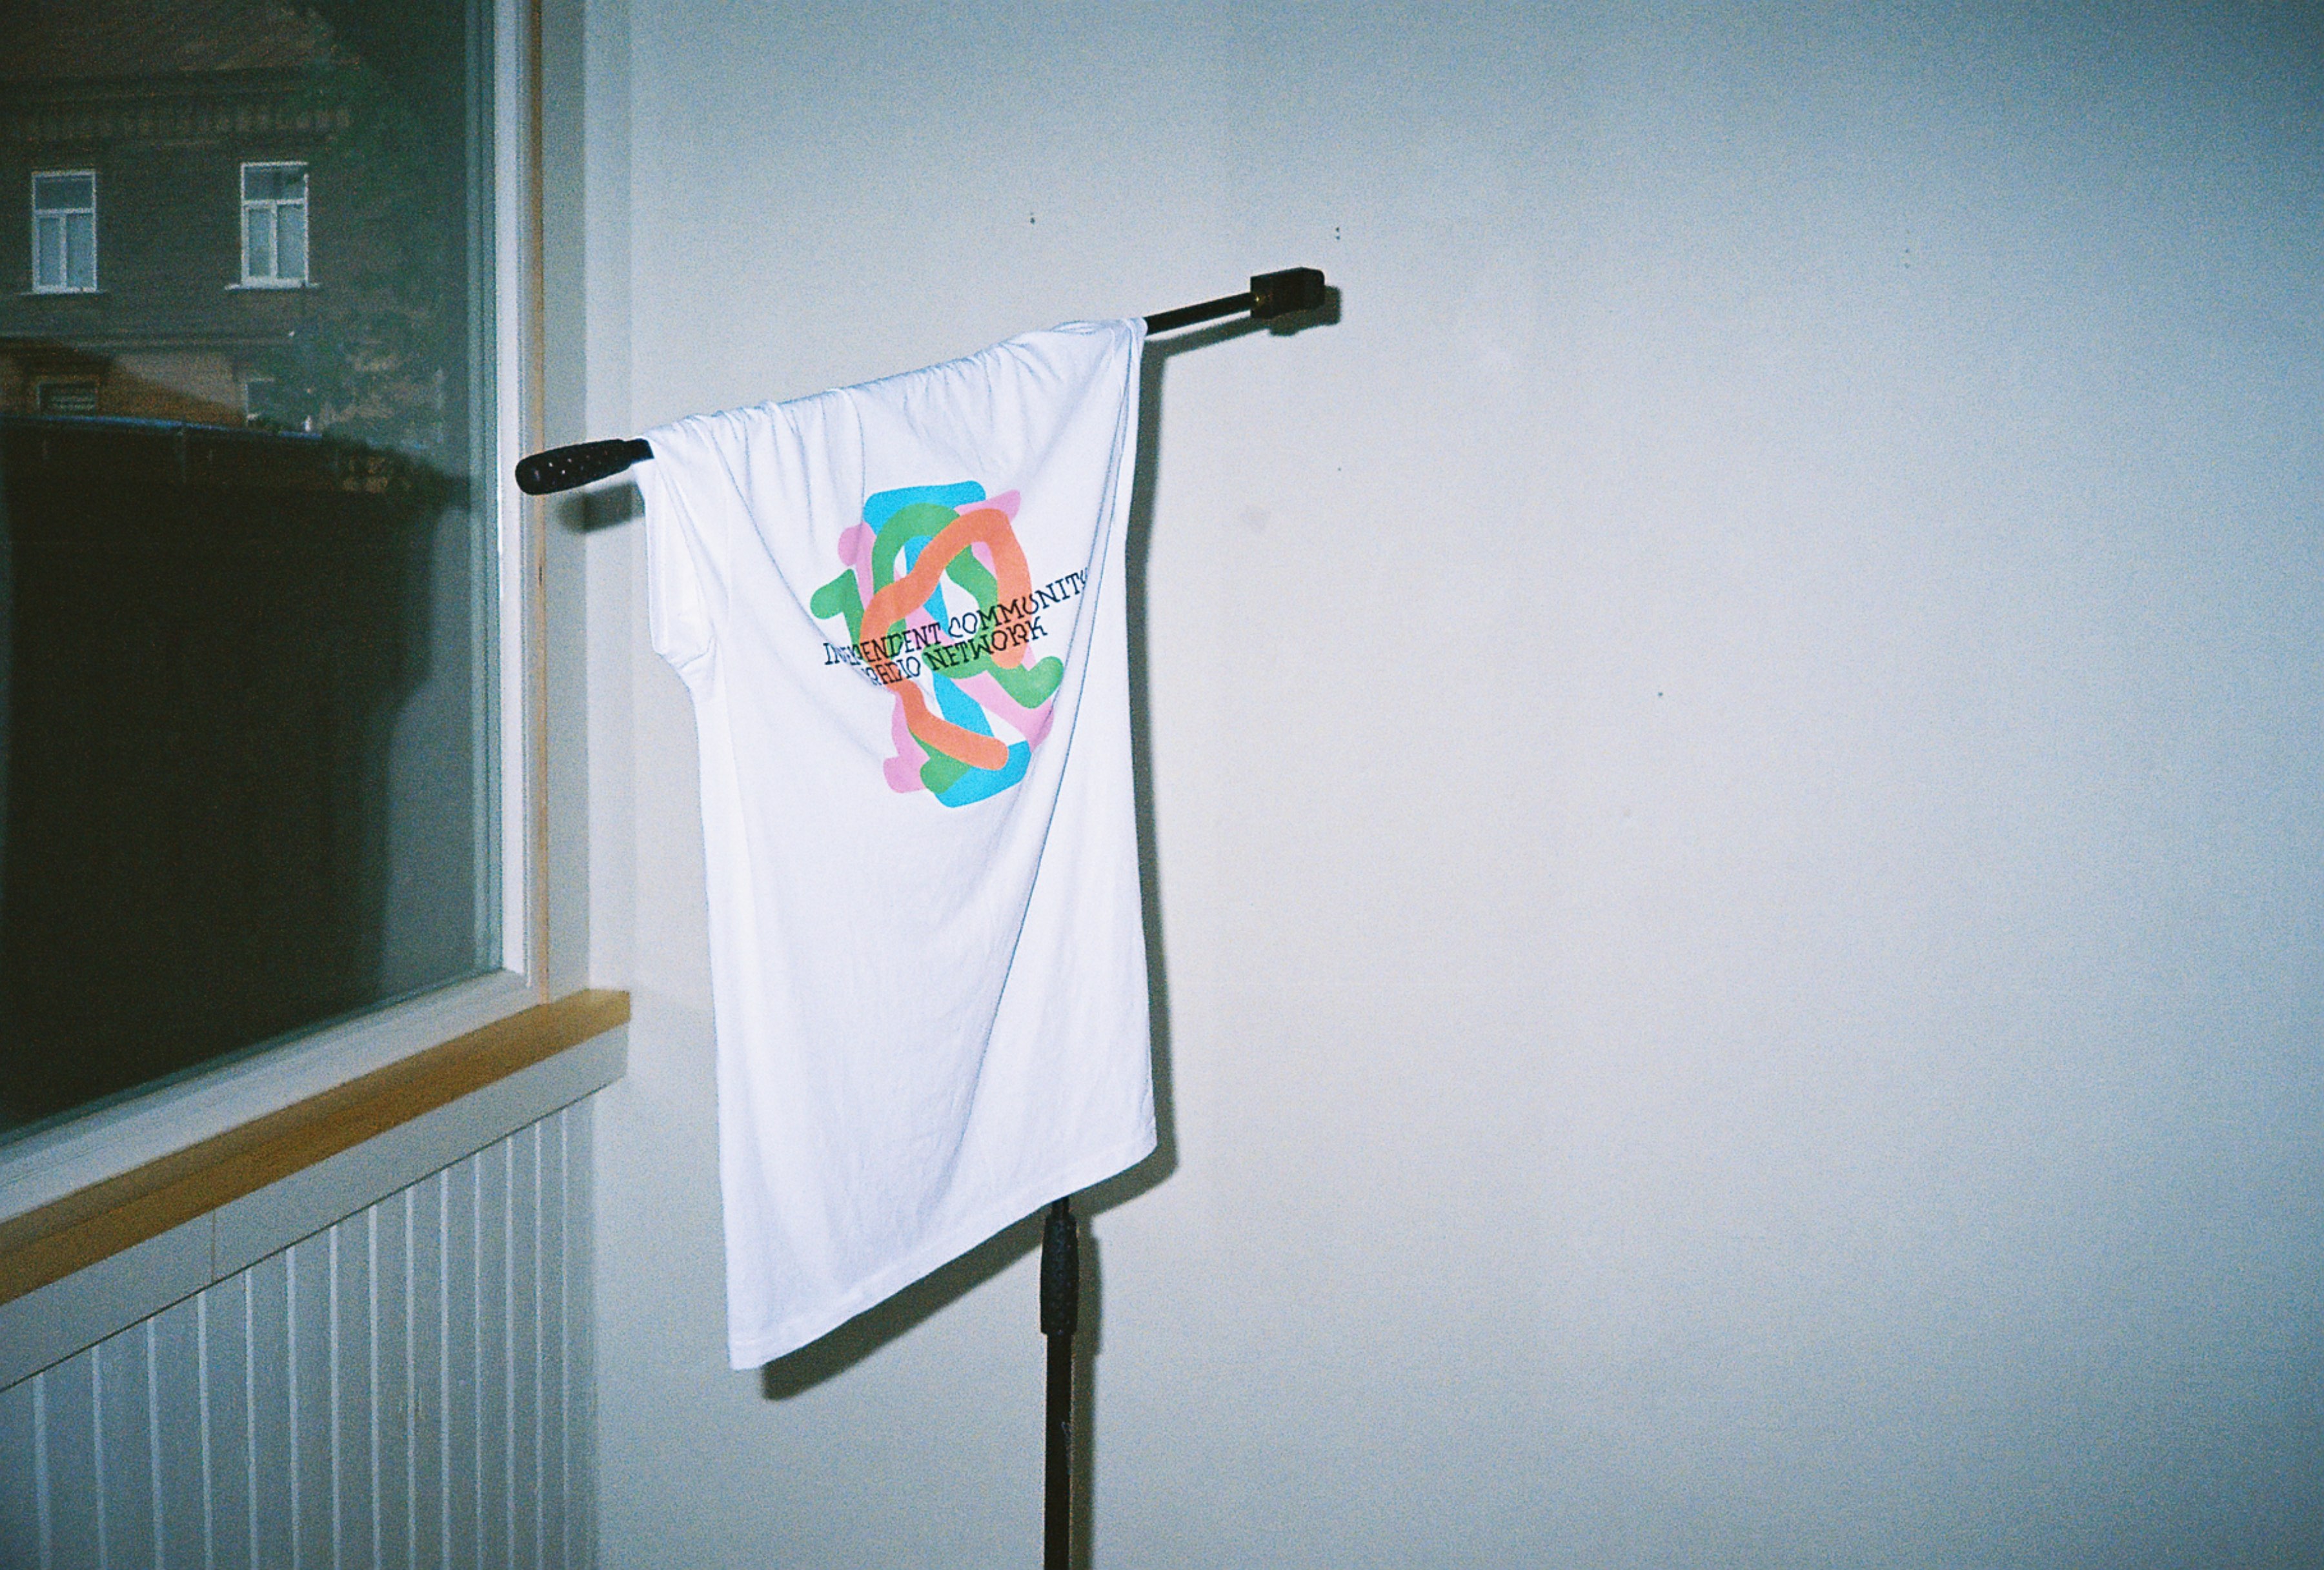 A color photo of a t-shirt hanging from a microphone stand. The t-shirt is white and has a print that says: Independent Community Radio Network.